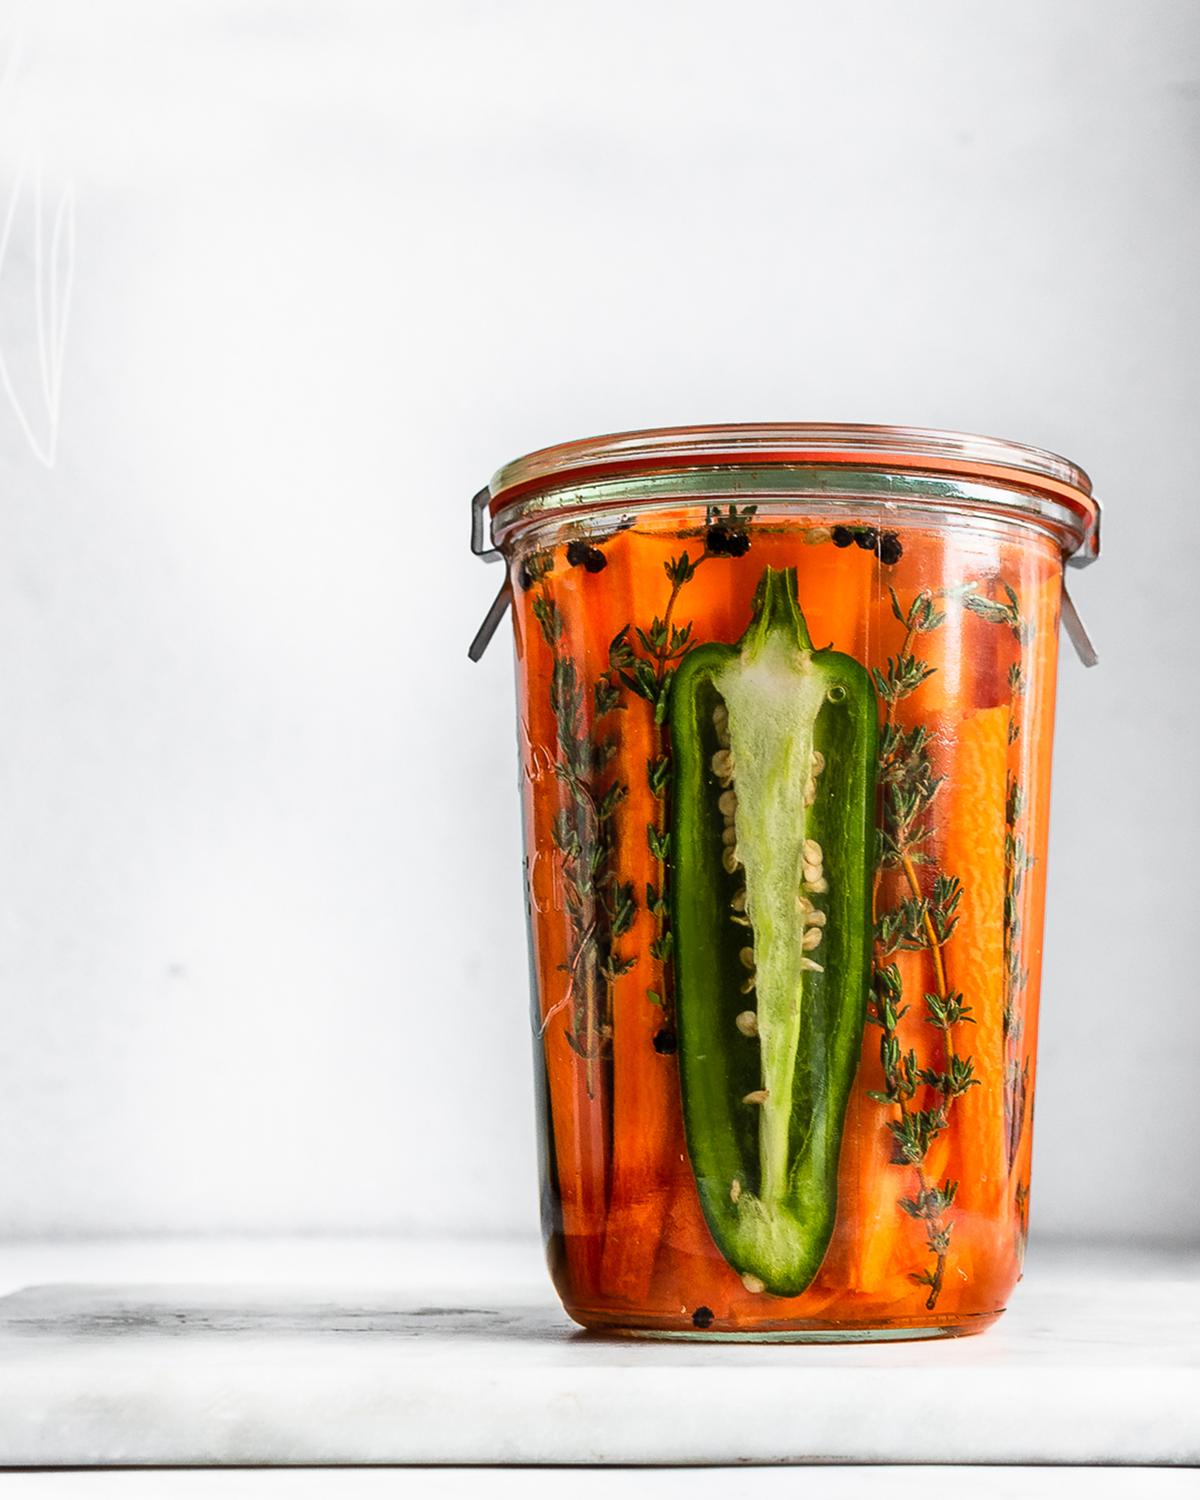 Thyme and black pepper give these fermented carrots a pleasant herbal aroma, while a single jalapeño and plenty of garlic give it a kick. (Jennifer McGruther)